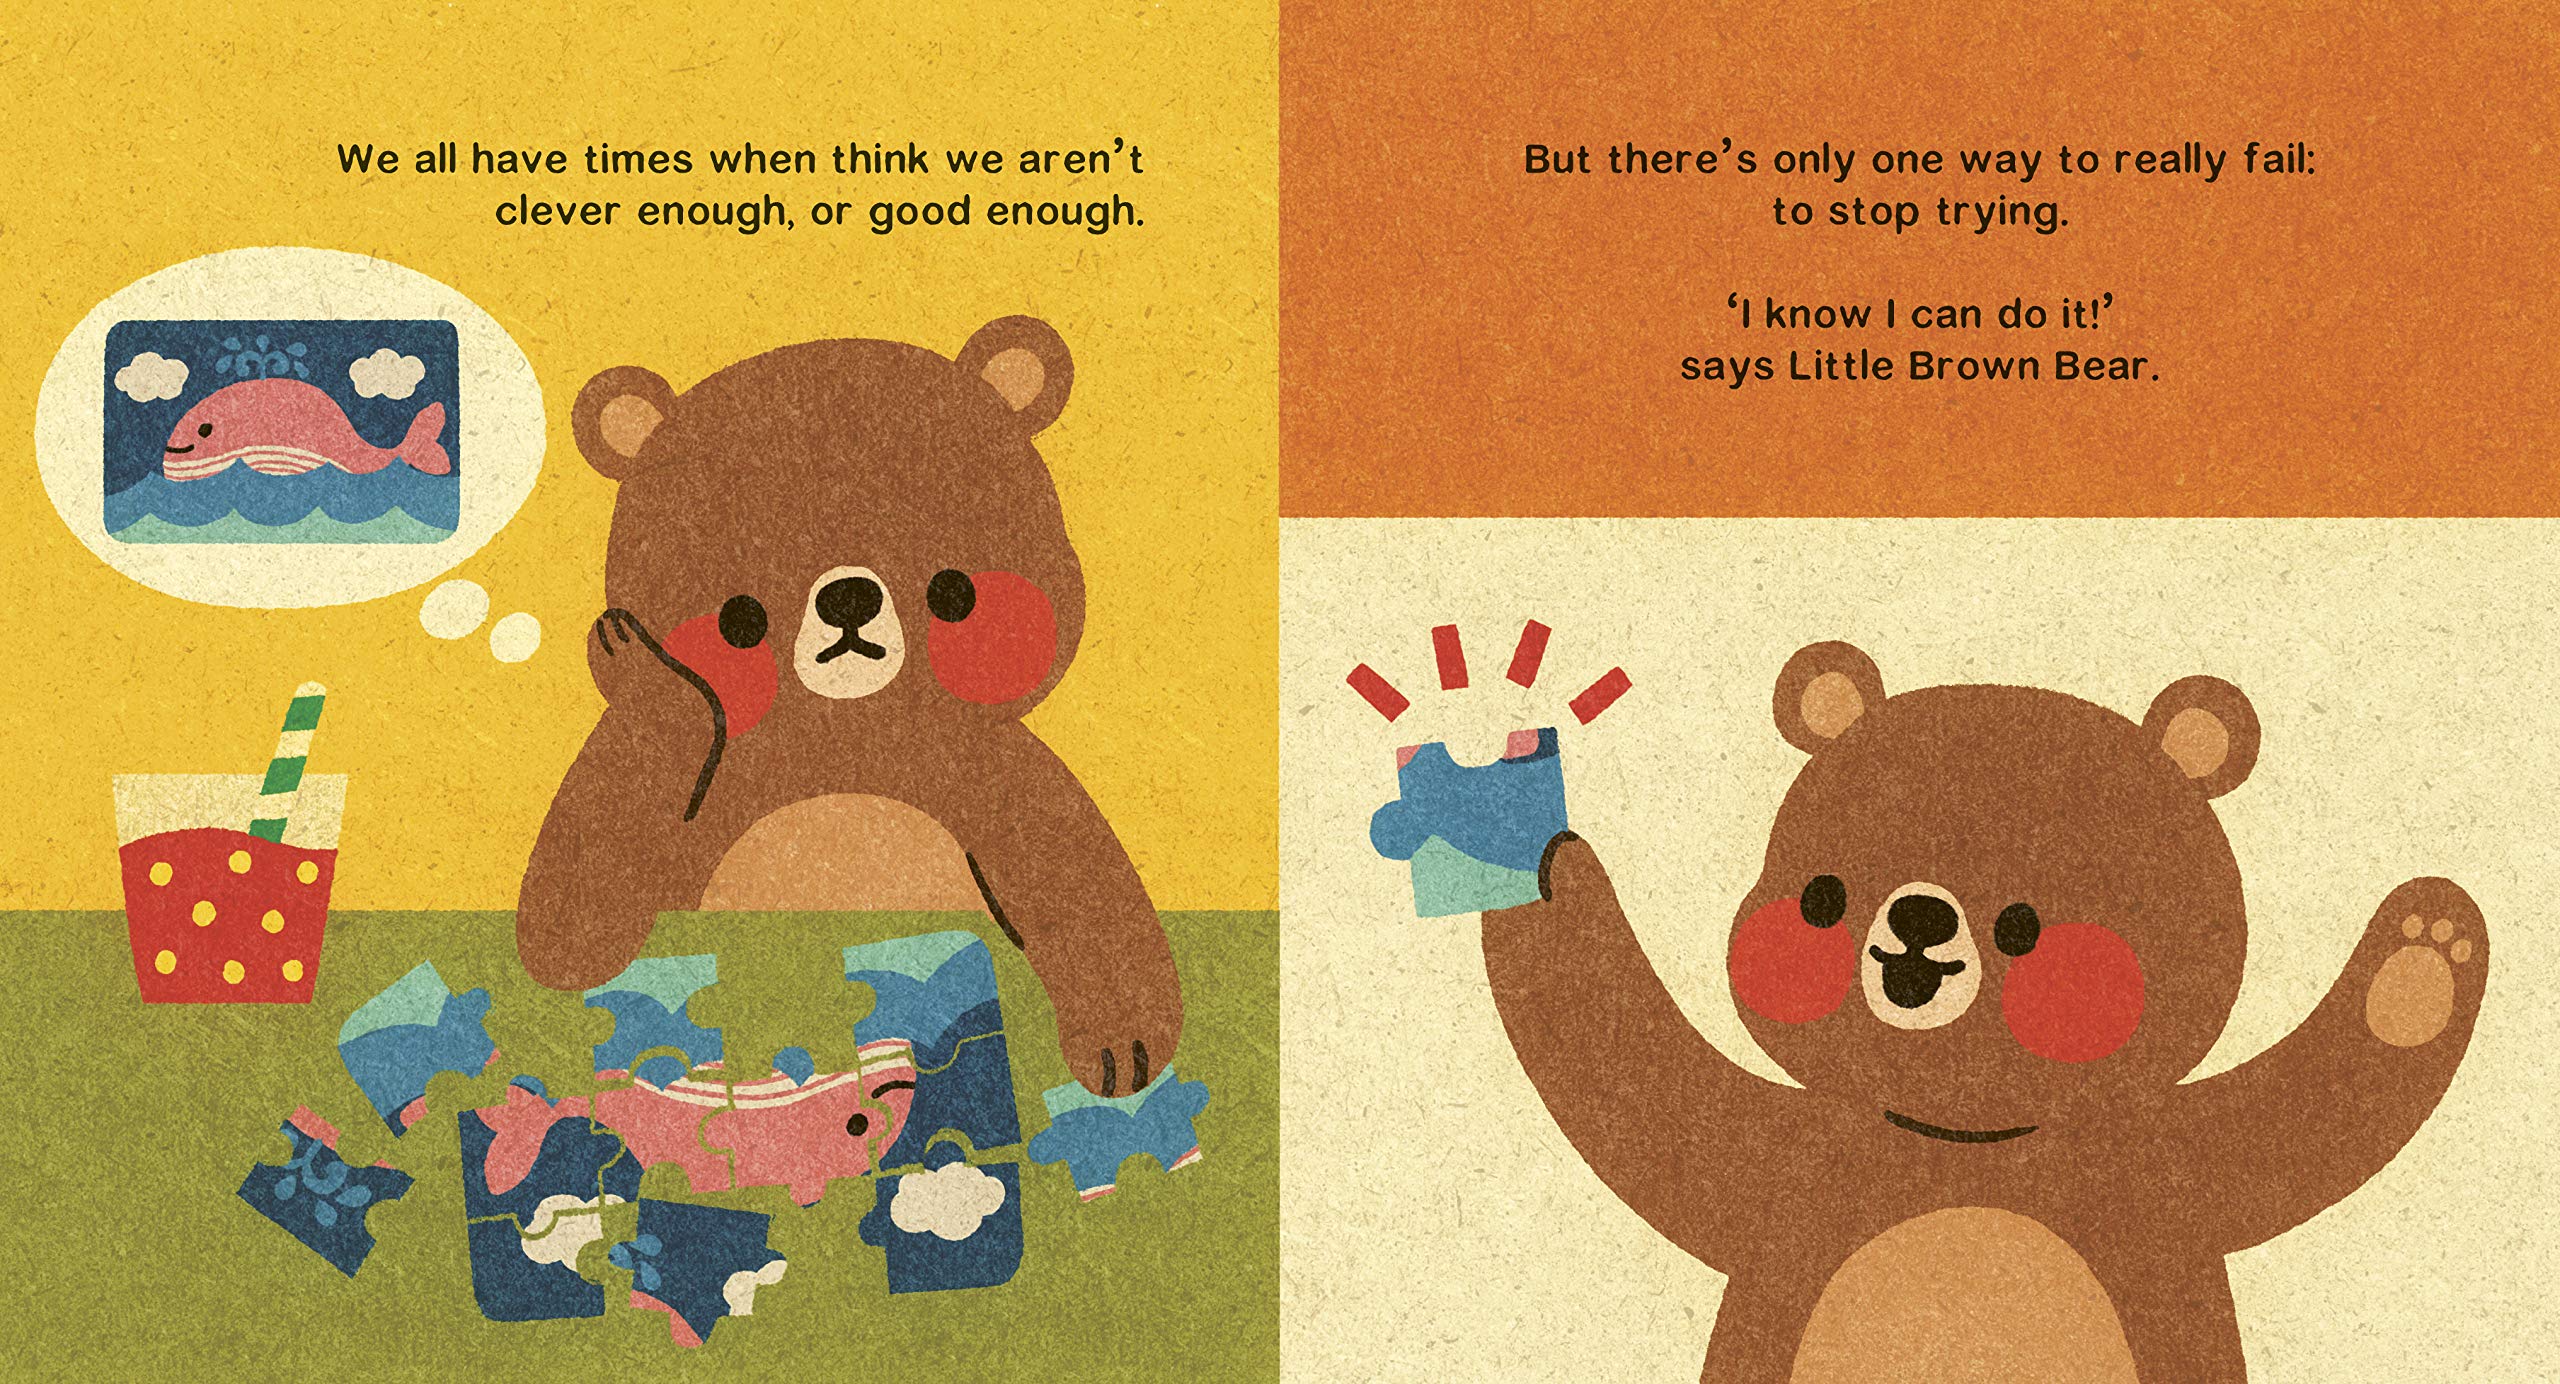 It's OK to Make Mistakes - Little Brown Bear